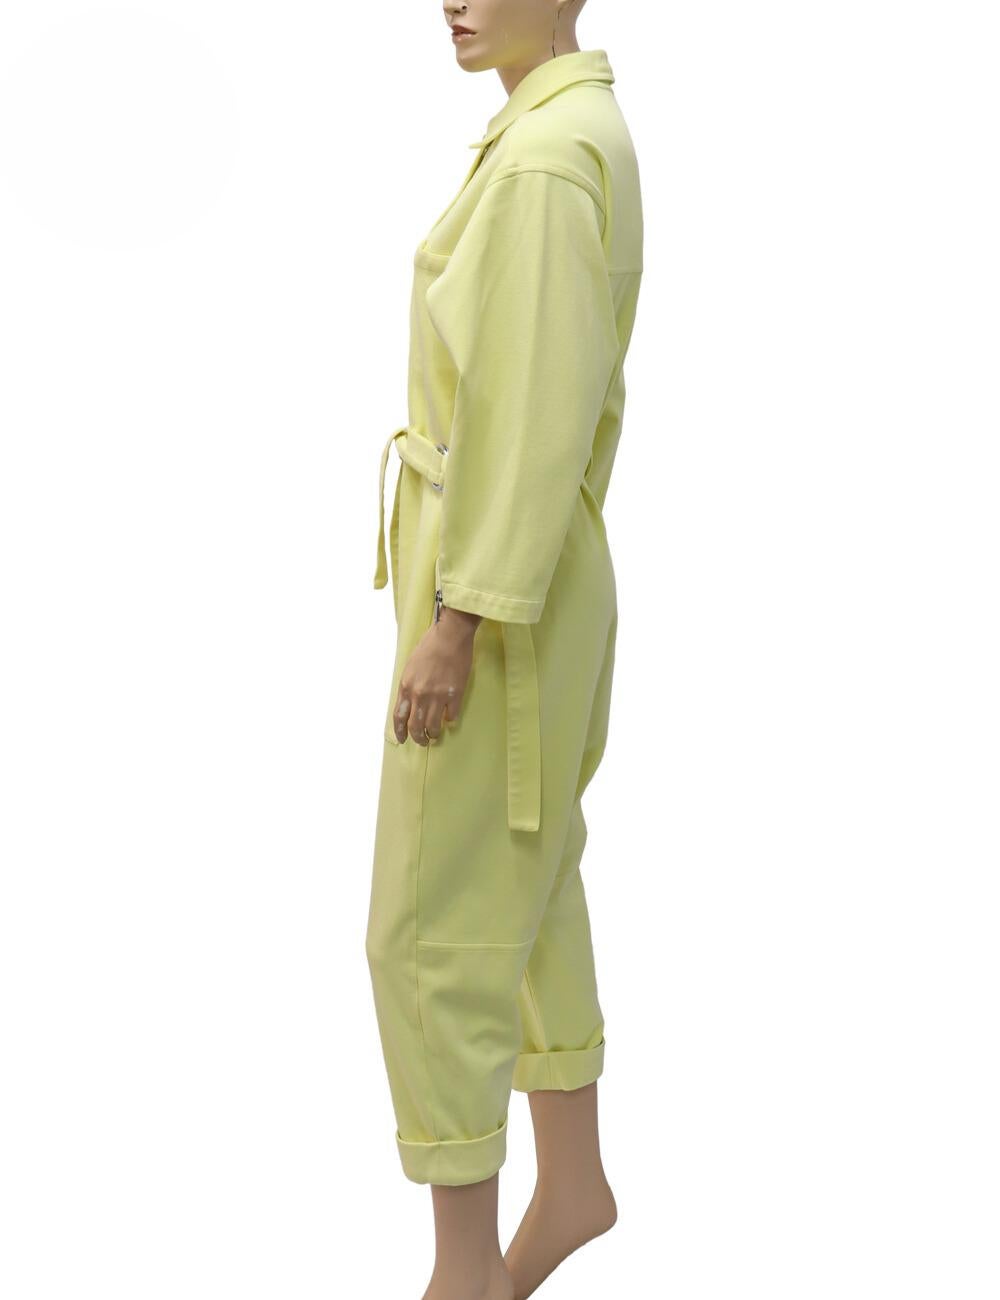 Phillips Lim Pastel Yellow Knit Twill Utility Jumpsuit, Features a Heavyweight jersey, Collared neckline, Snap flap and hidden zip placket, Long sleeves with zip cuffs and a Patch front and back pockets.

Material: 65% viscose/ 31% nylon/ 4%